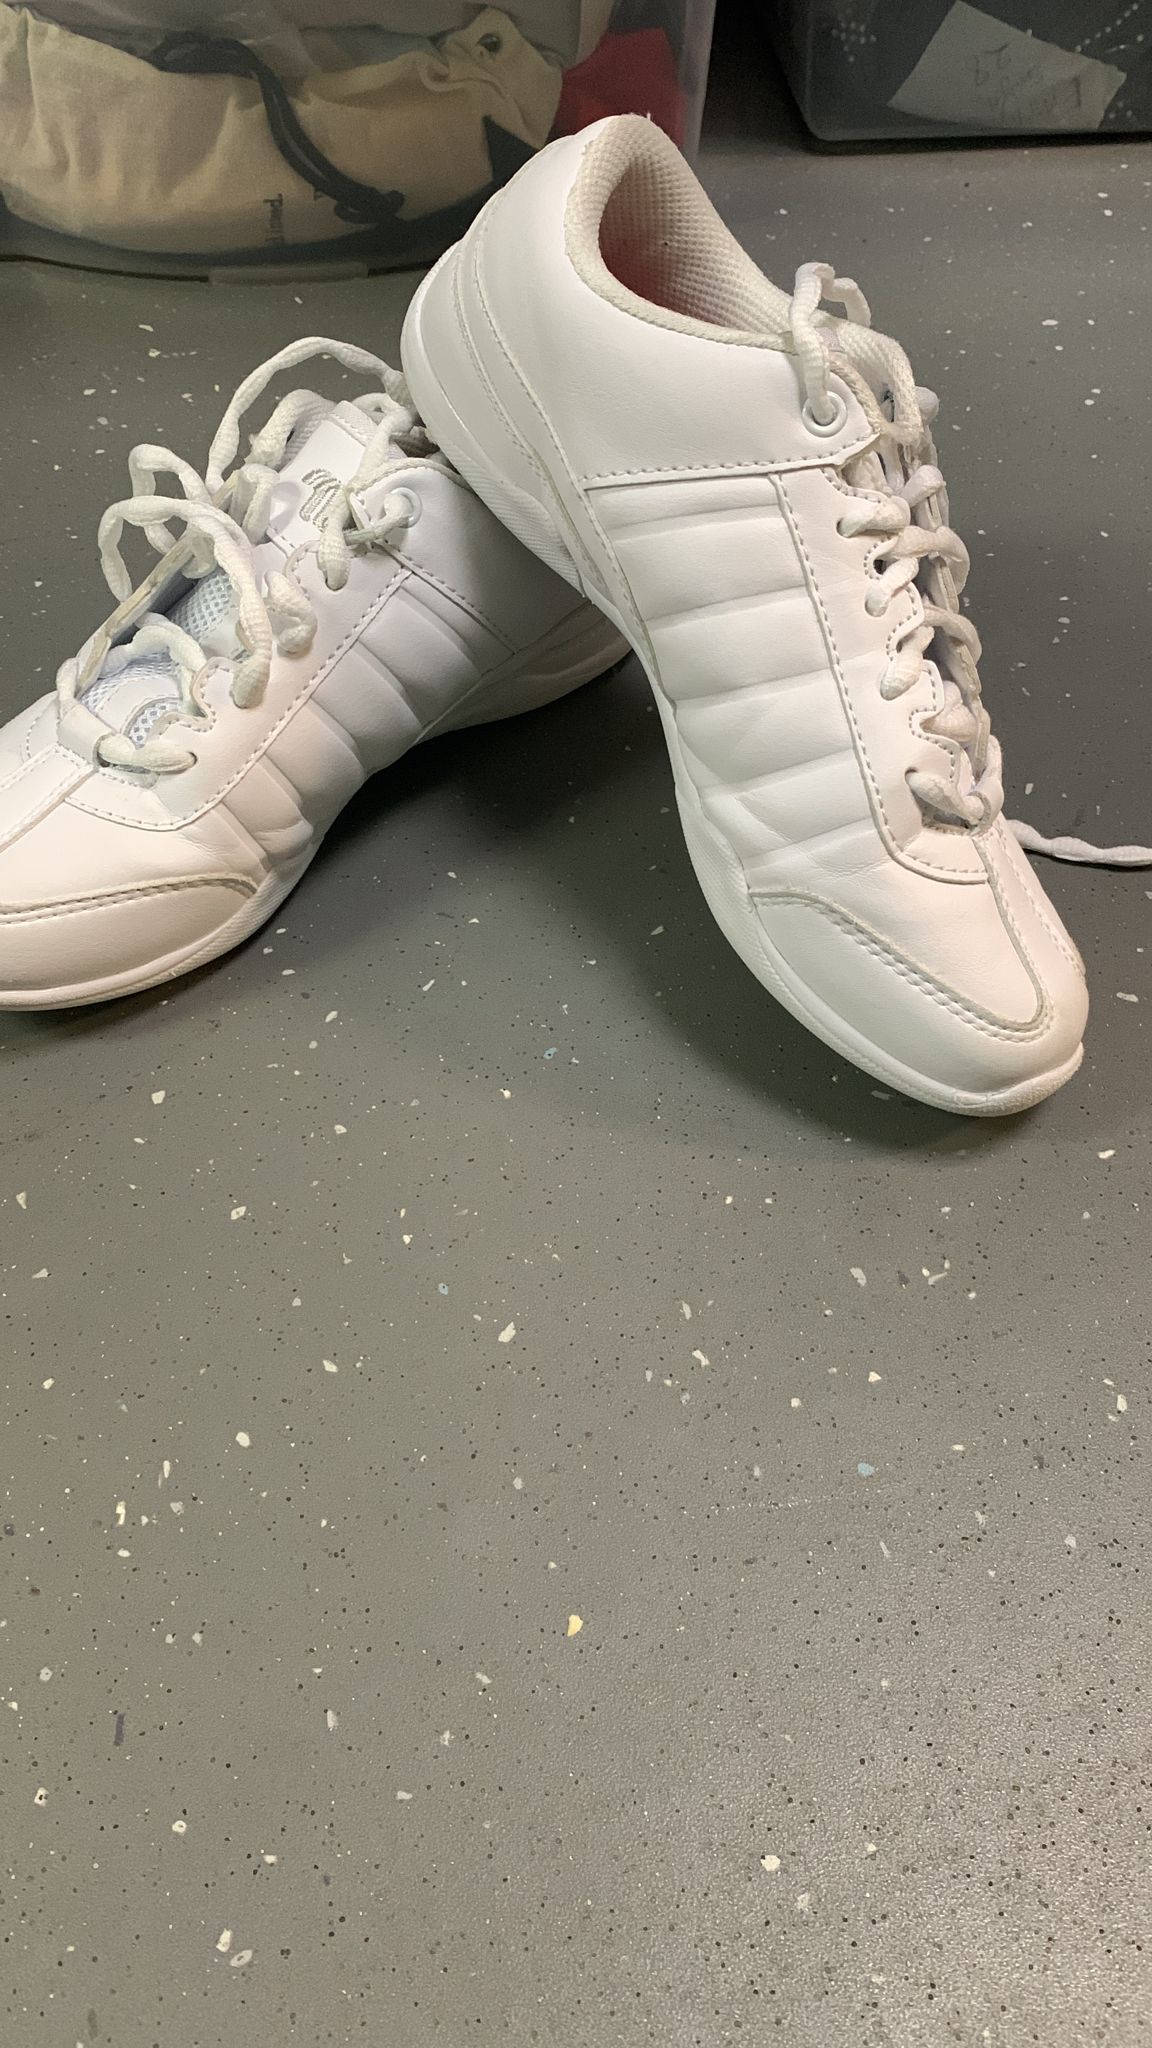 Cheer Shoes - Size UK 5